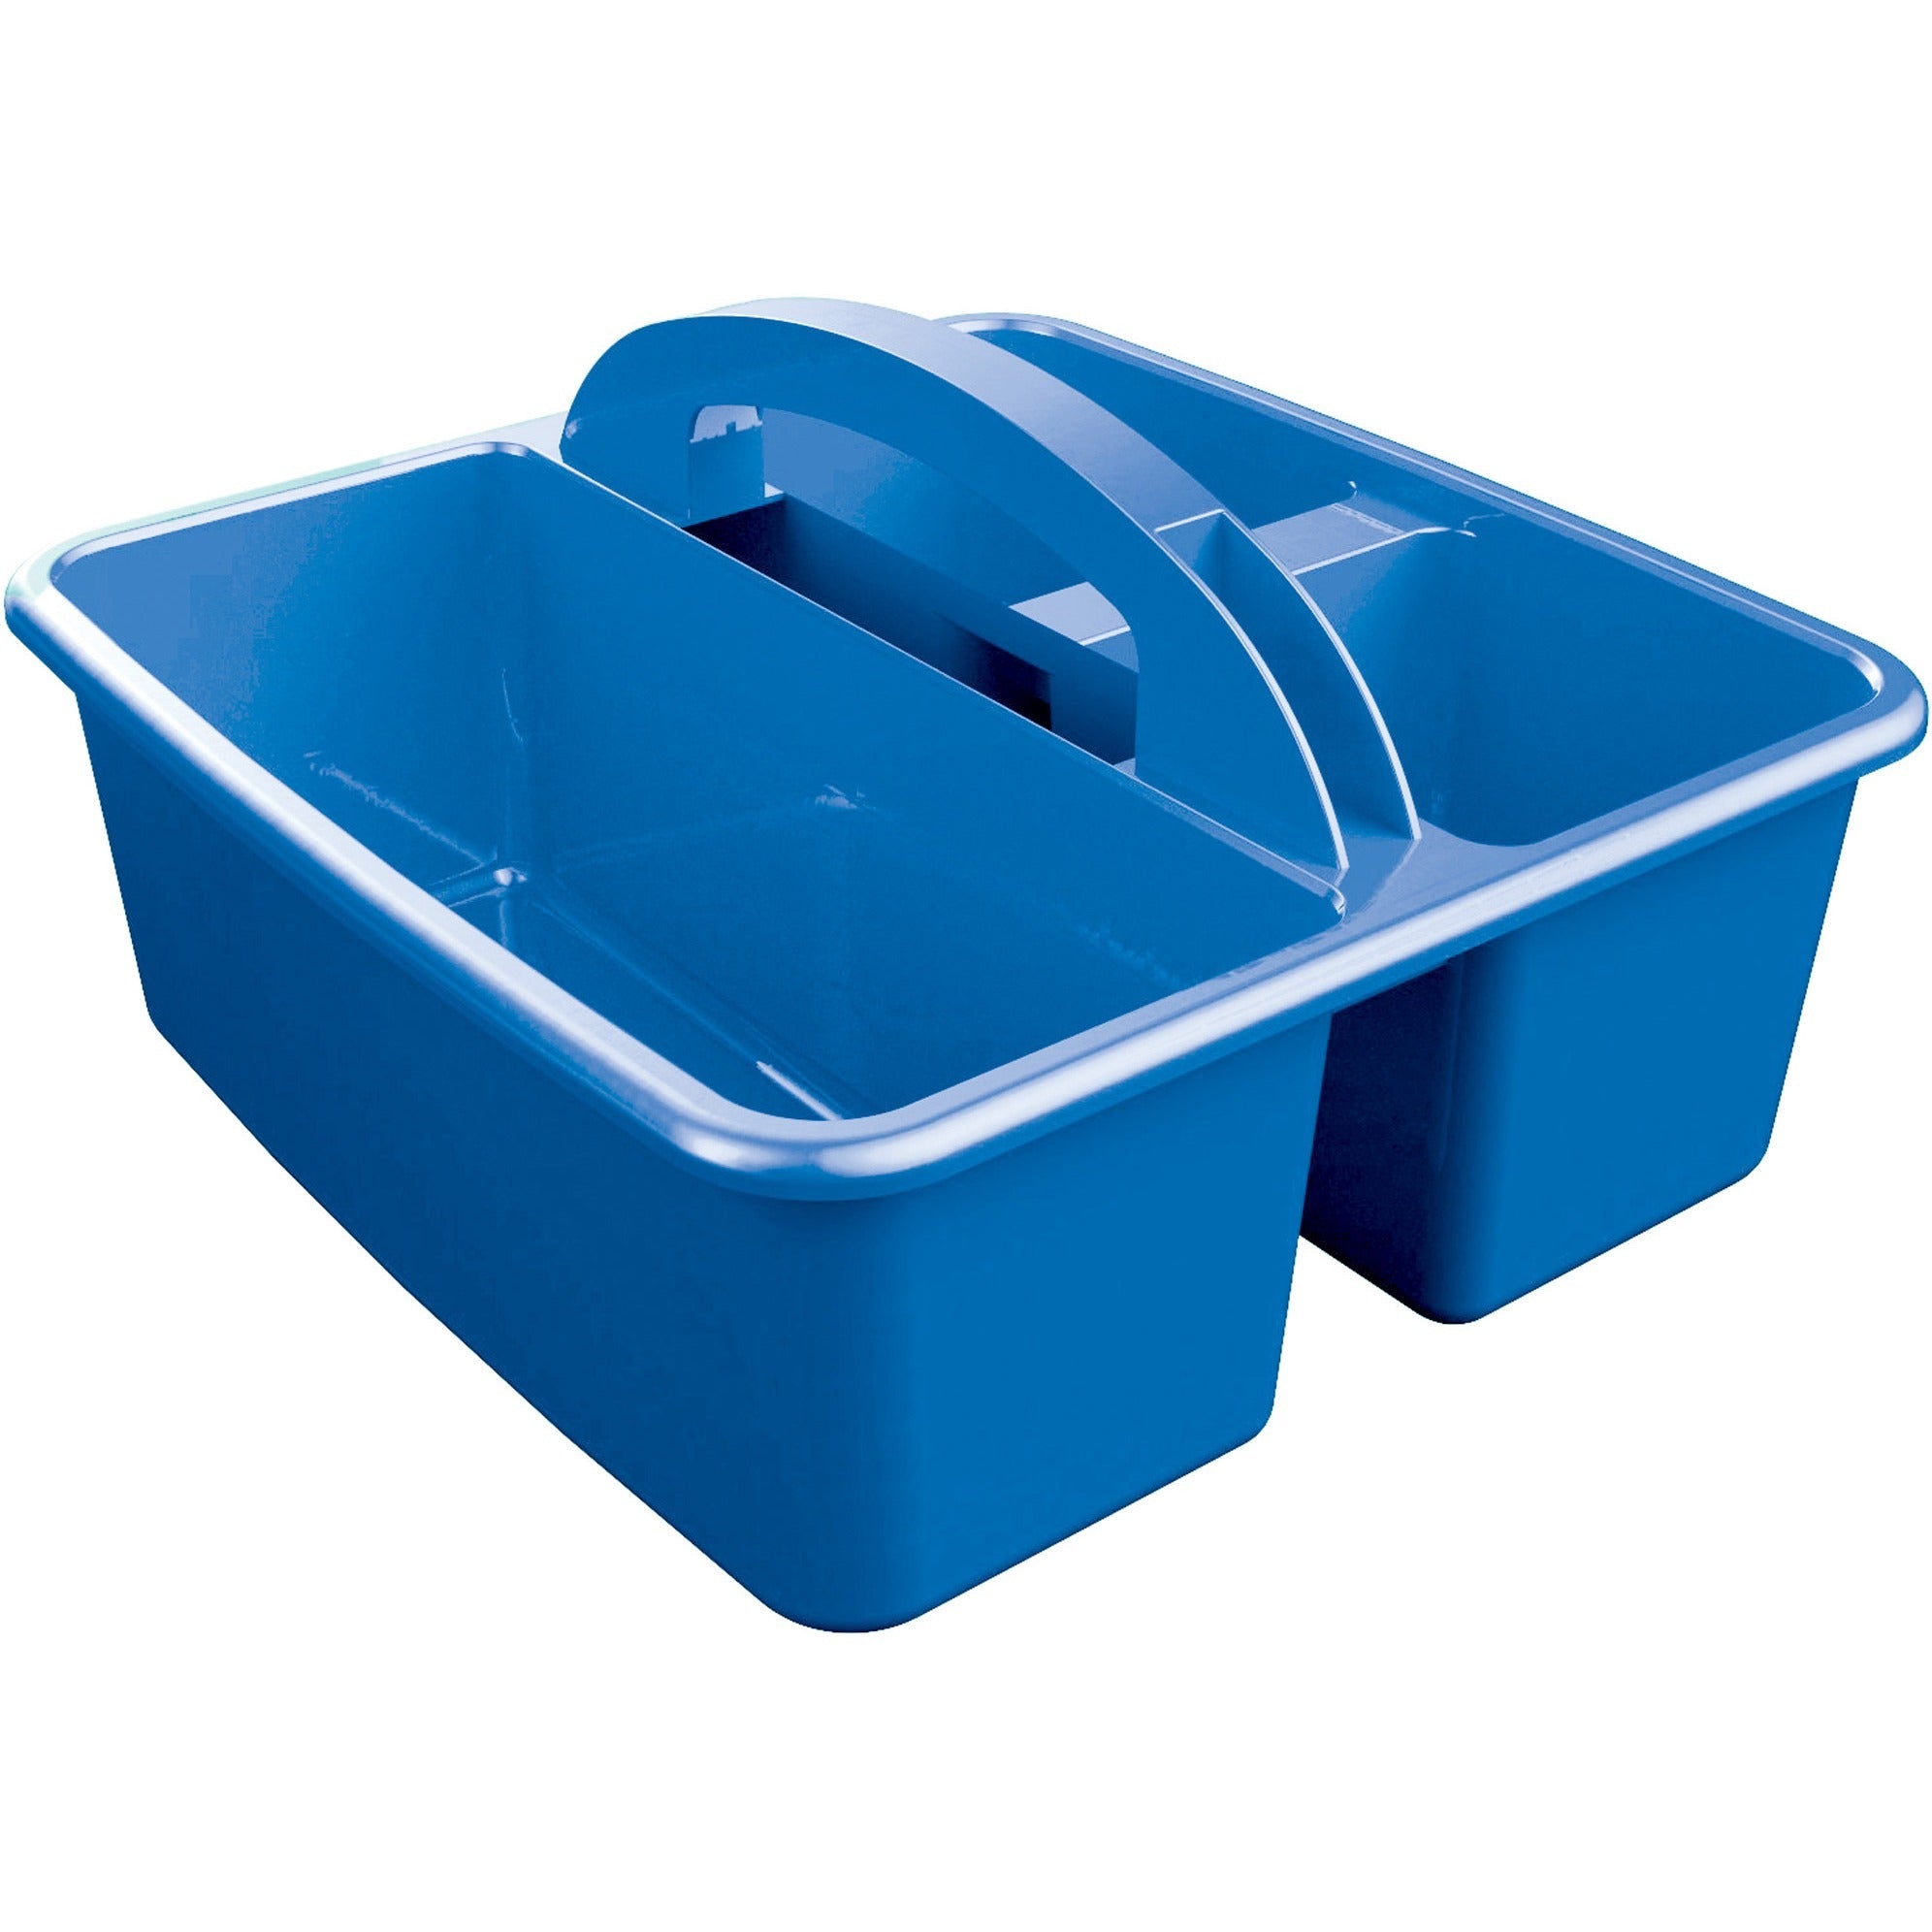 deflecto-antimicrobial-kids-storage-caddy-3-compartments-53-height-x-94-width-x-93-depth-antimicrobial-lightweight-portable-mold-resistant-mildew-resistant-durable-washable-stackable-blue-polypropylene-1-each_def39505blu - 4